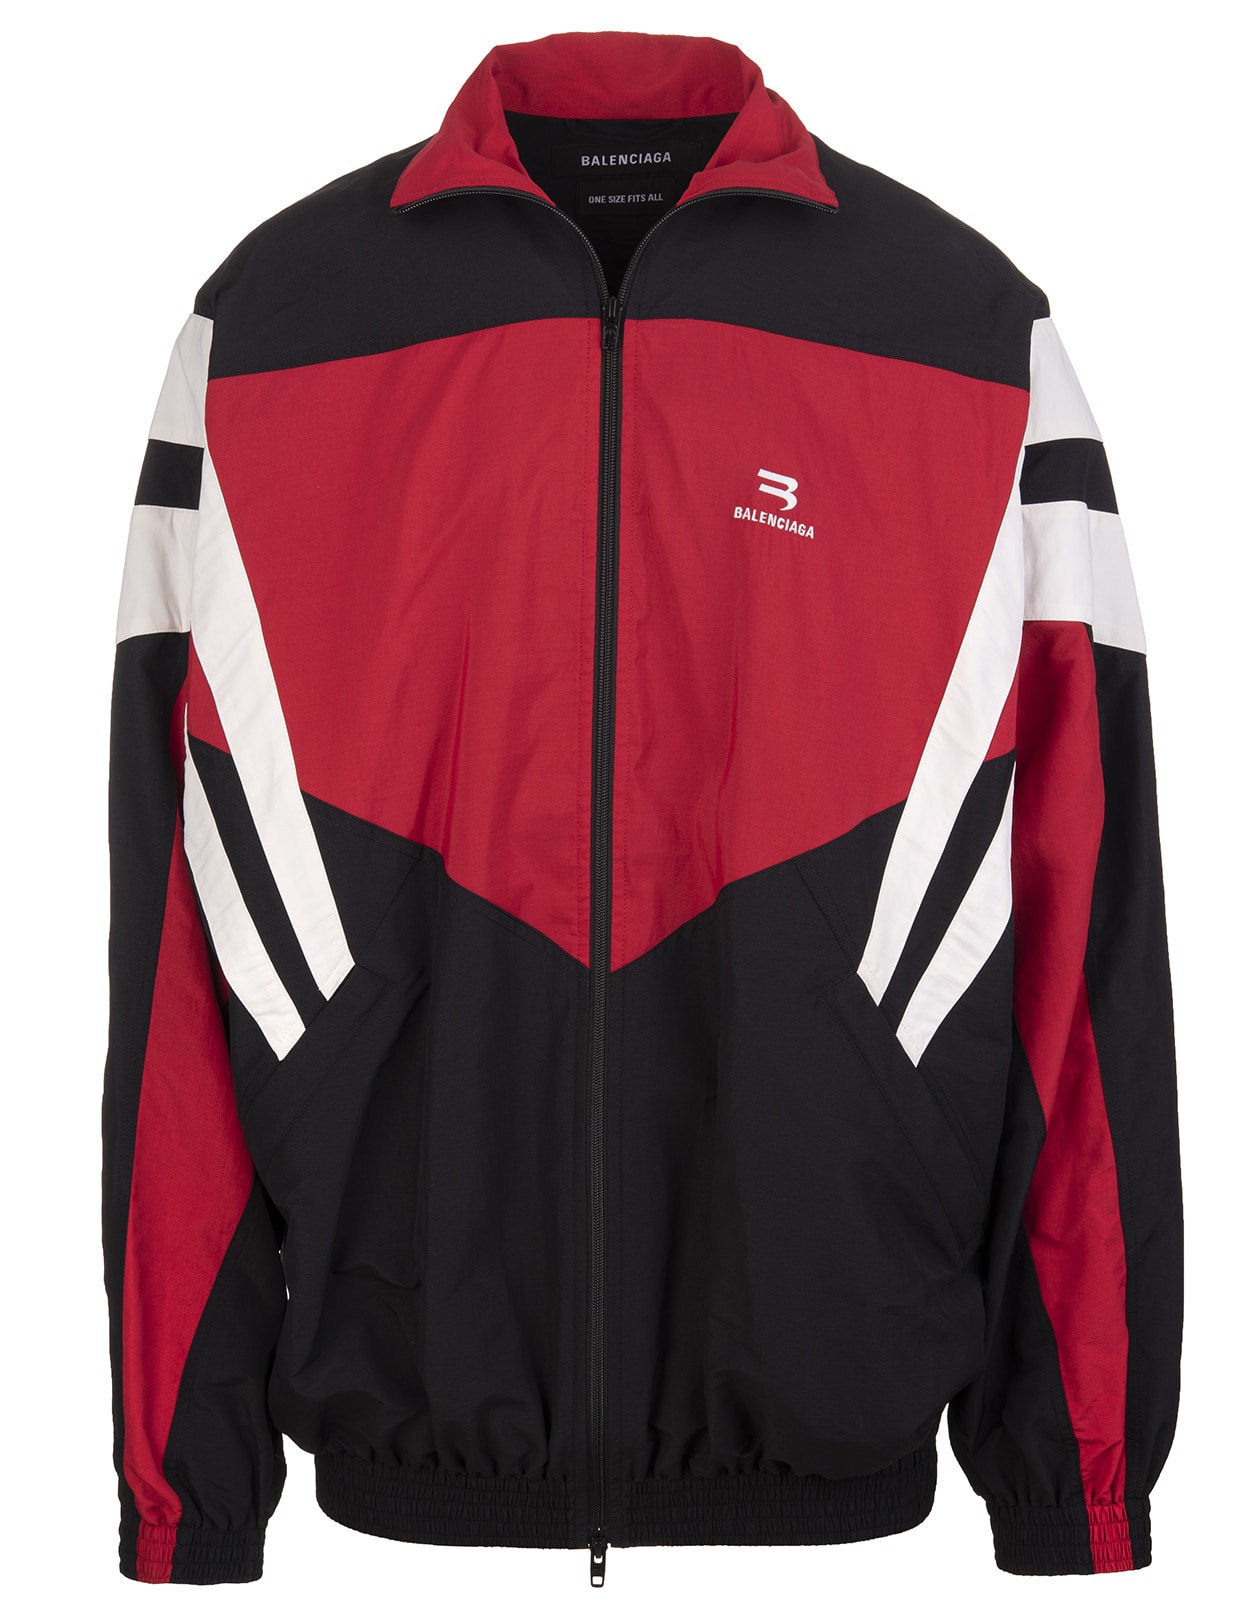 Balenciaga One Size Tracksuit Jacket In Black, Red And White